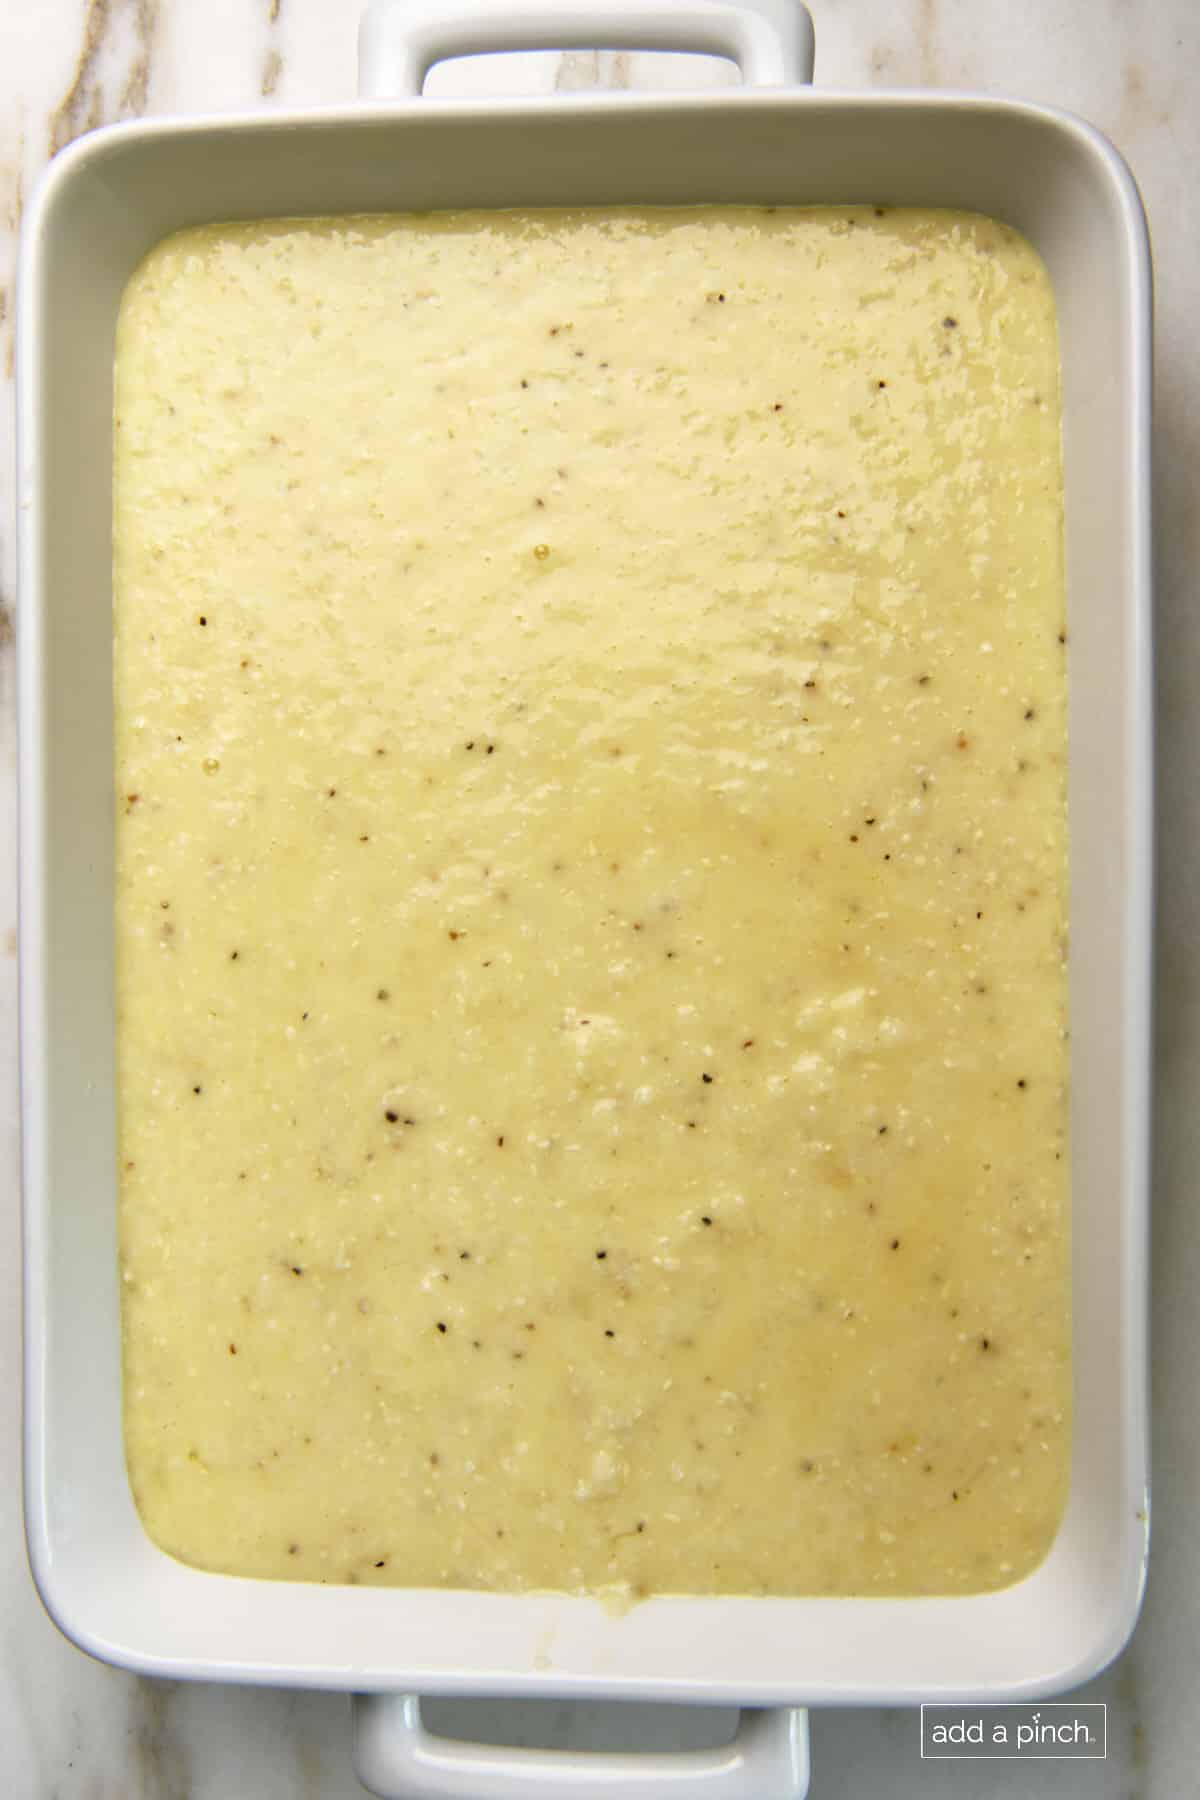 Photo of grits casserole mixture added to a baking dish for cooking.